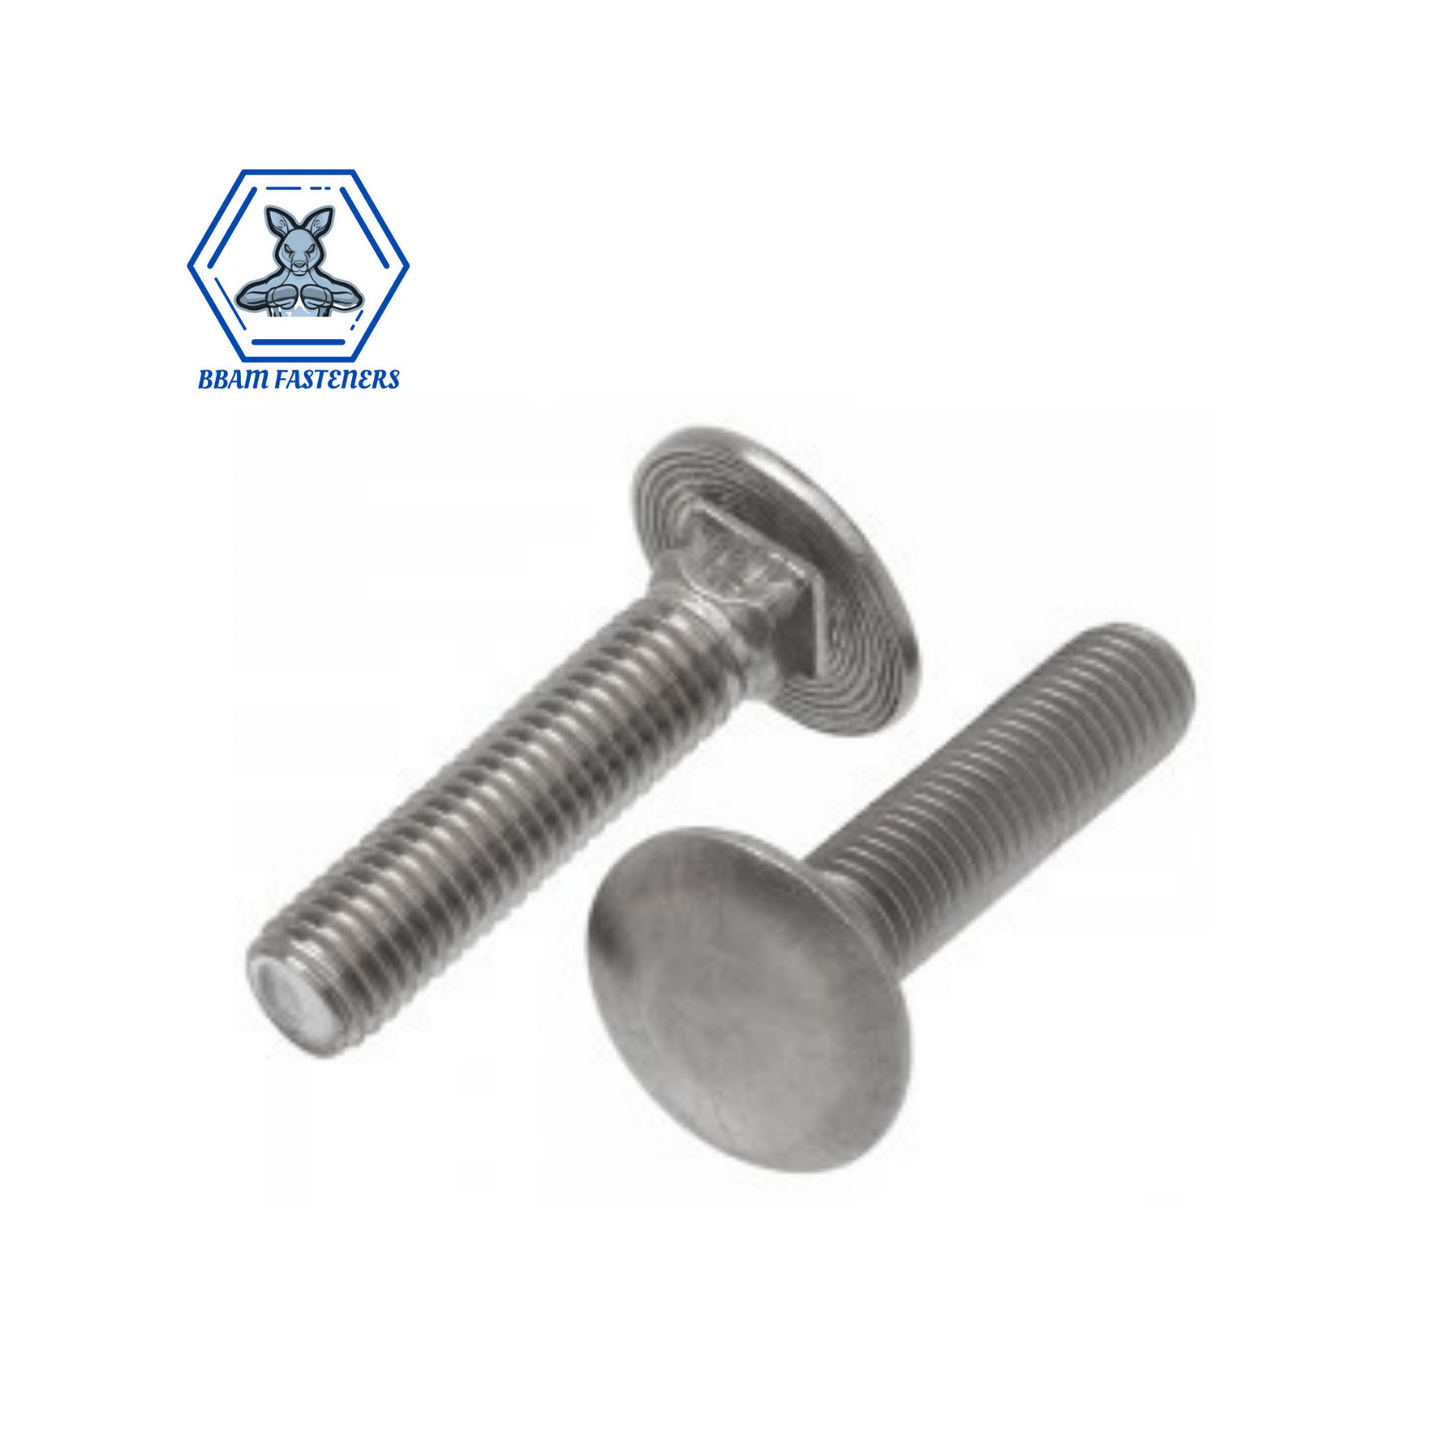 M6 x 40mm Marine Stainless Grade 316 Cup Head Bolt Coach Carriage